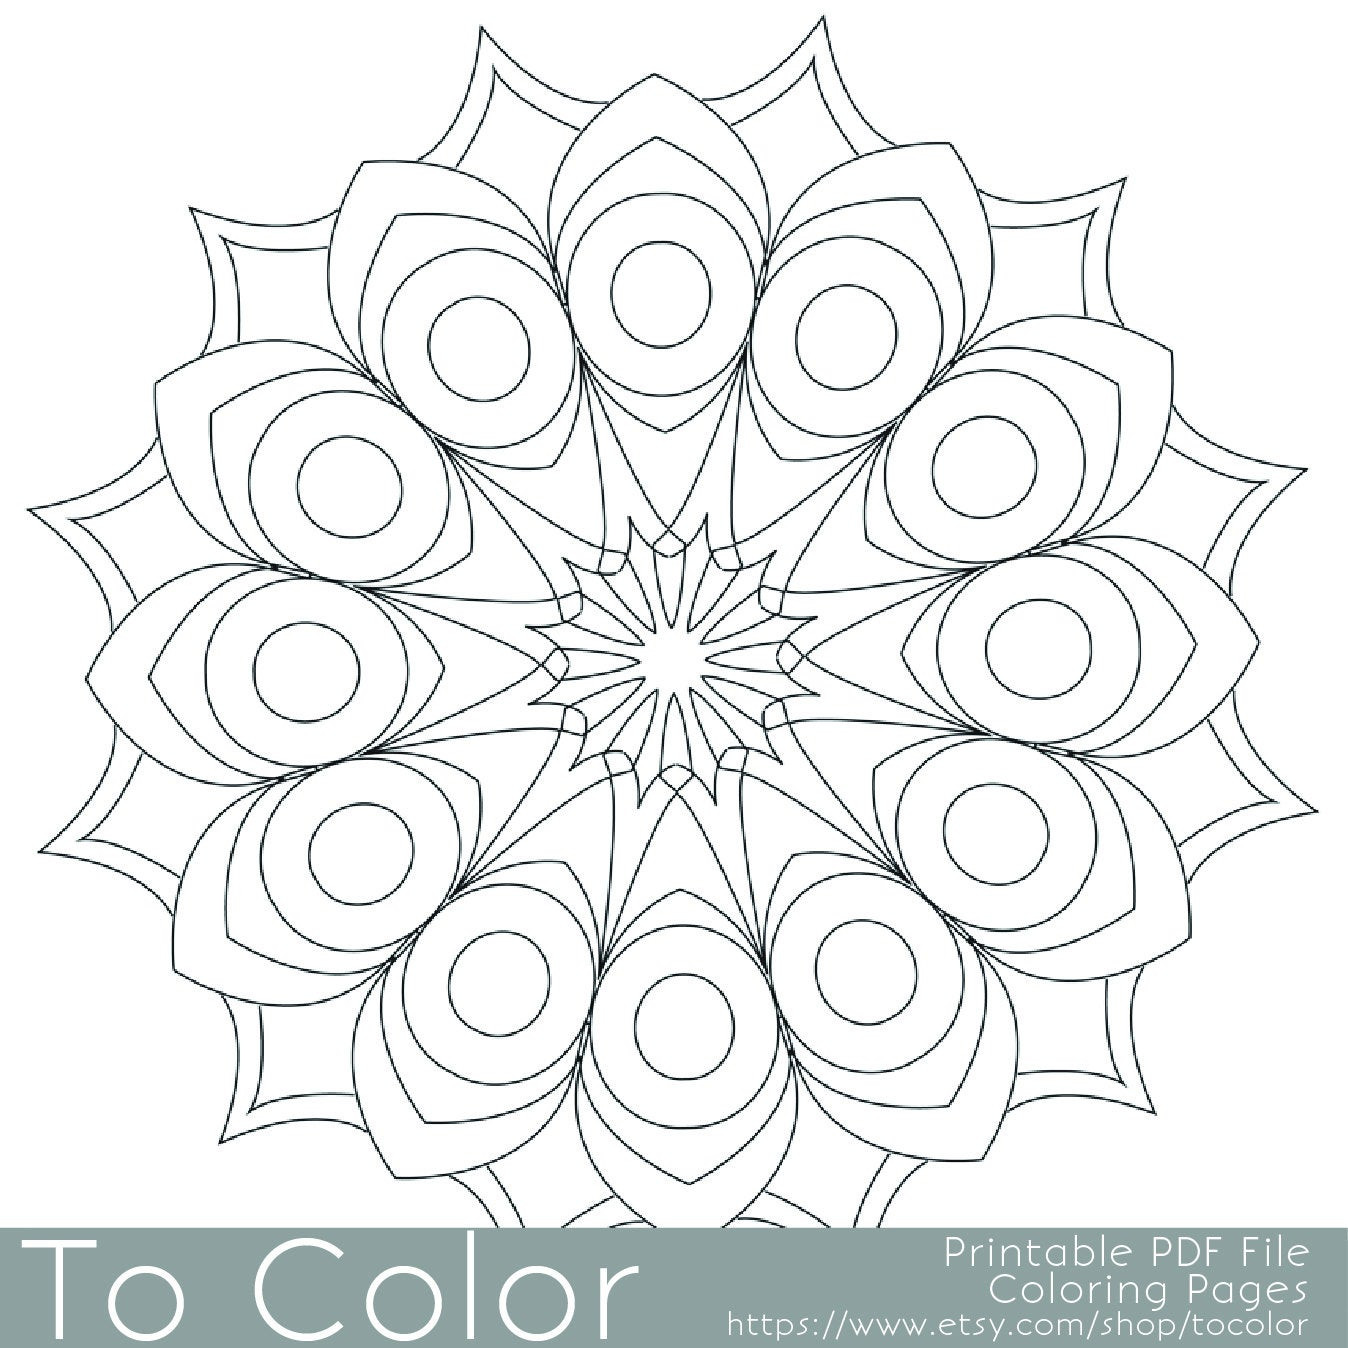 Large Coloring Pages For Adults
 Printable Circular Mandala Easy Coloring Pages for Adults Big